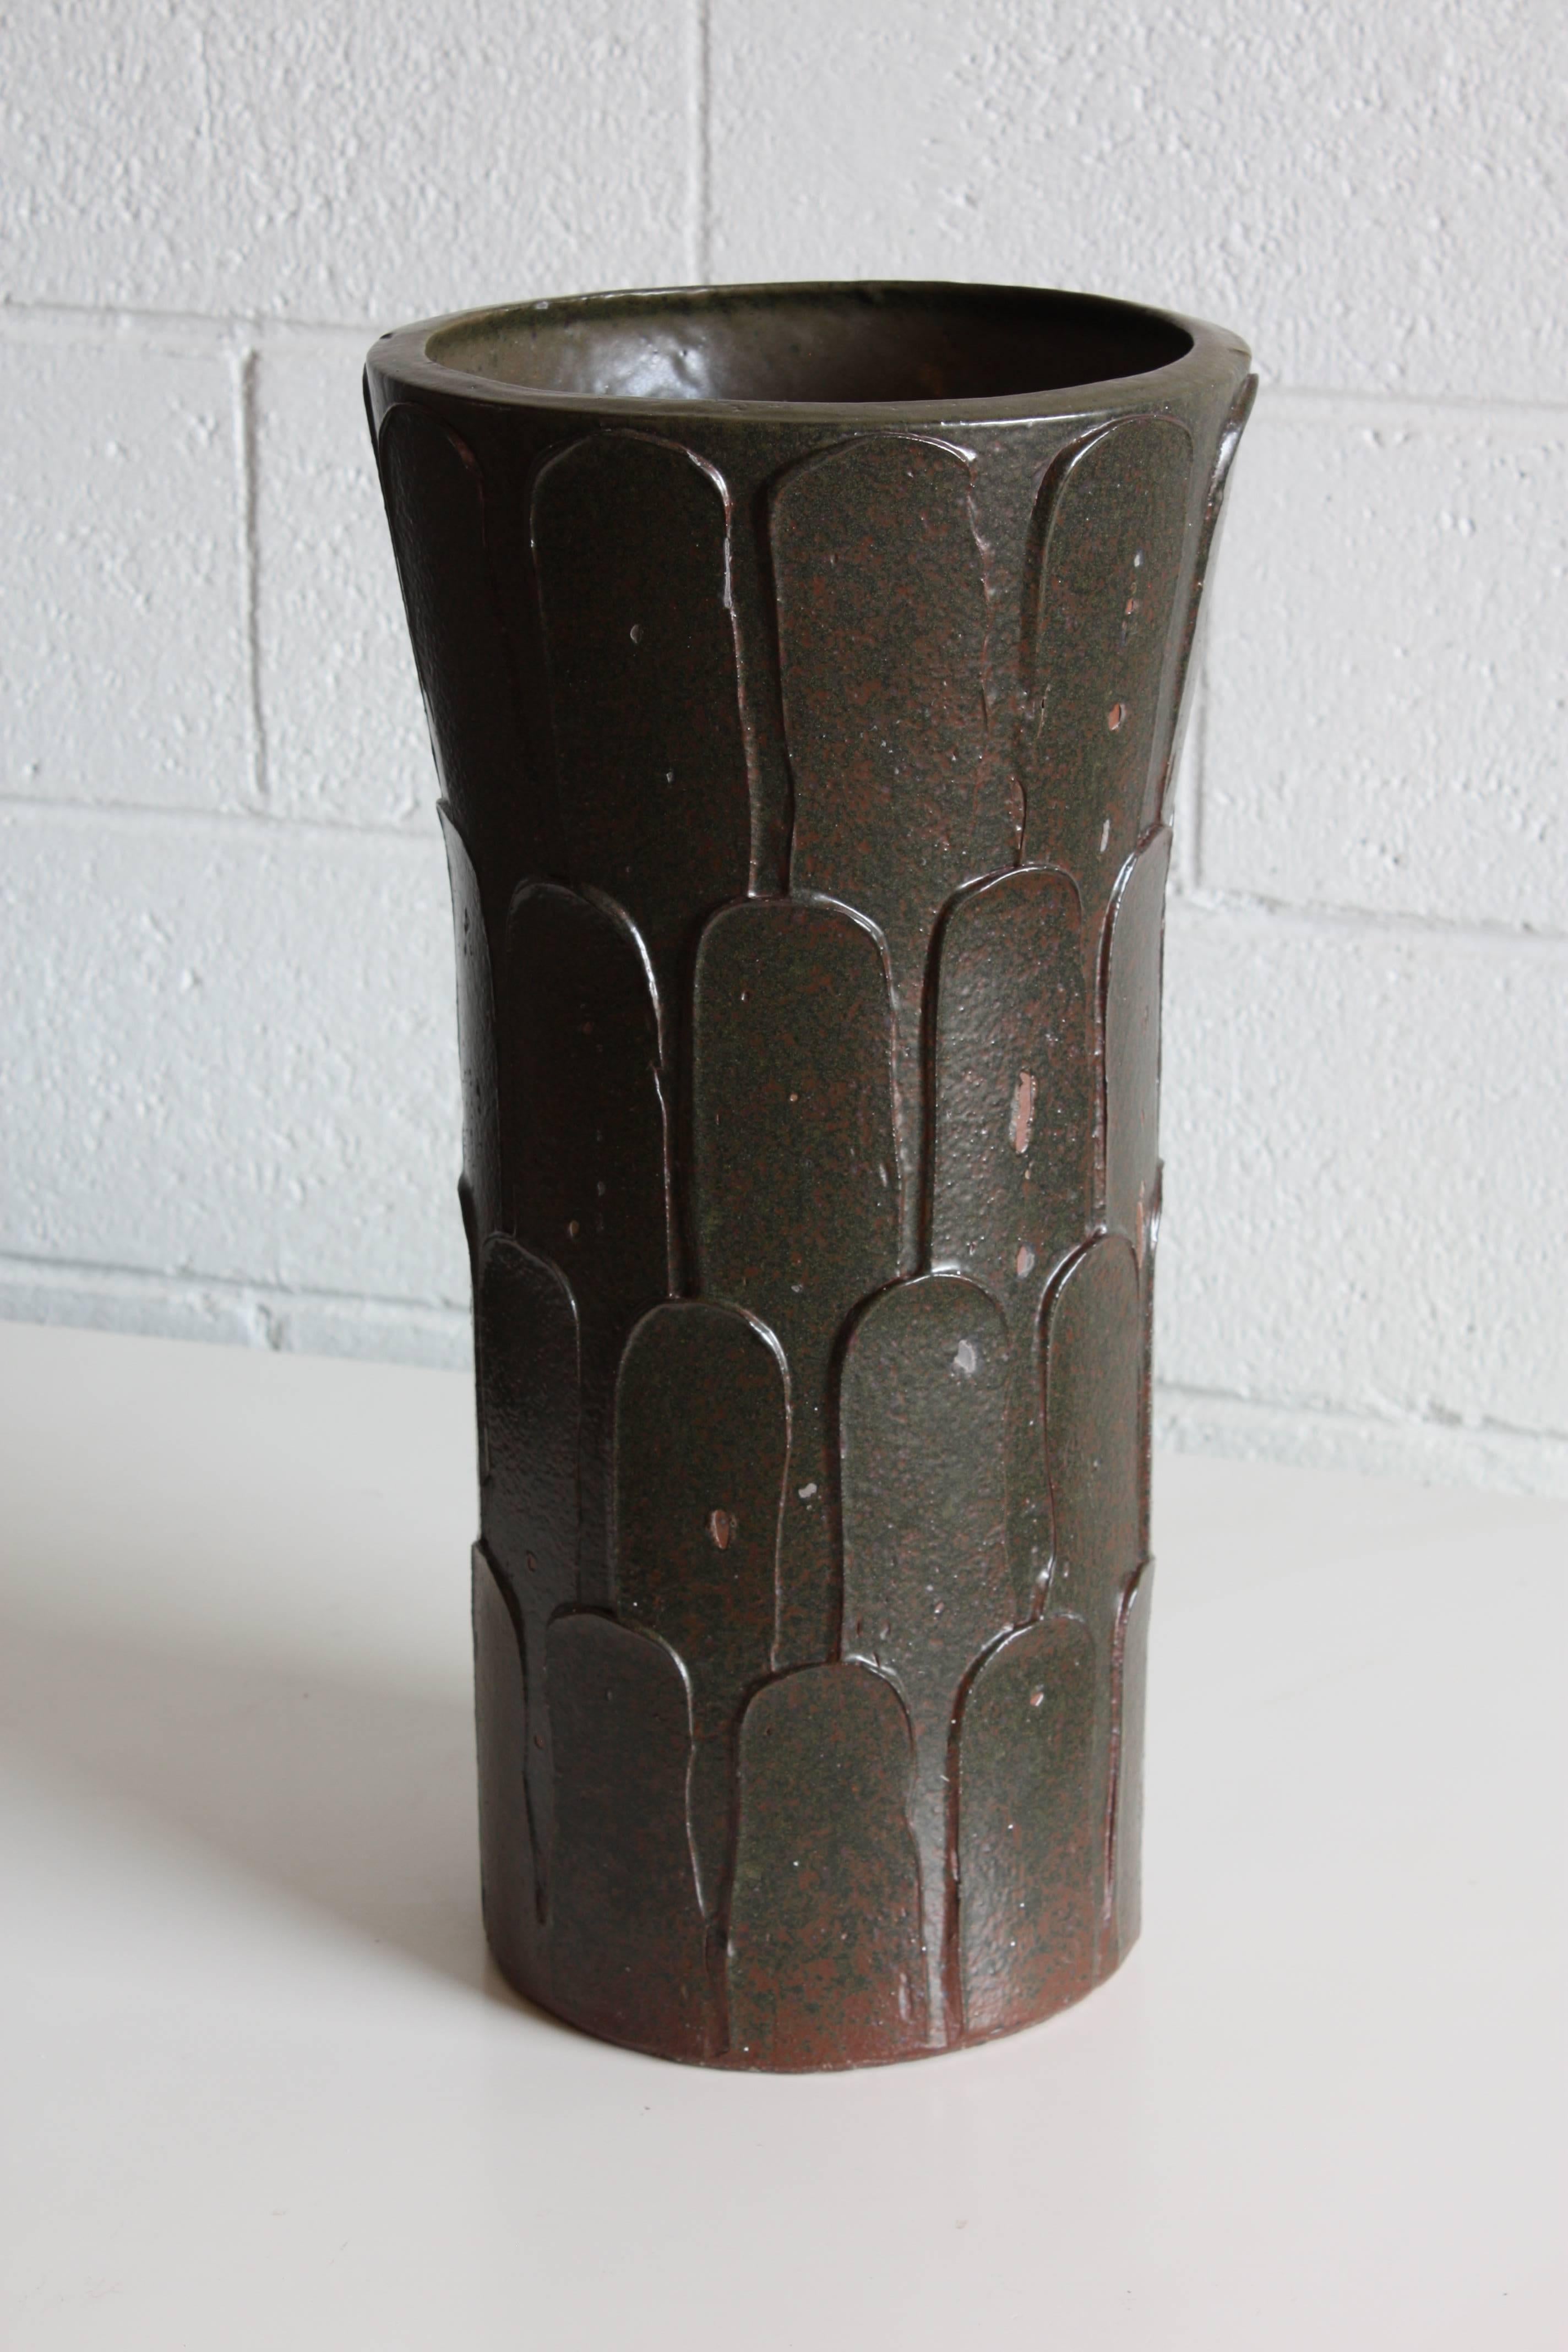 Mid-Century Modern Large Umbrella Stand or Pot by David Cressey for Architectural Pottery